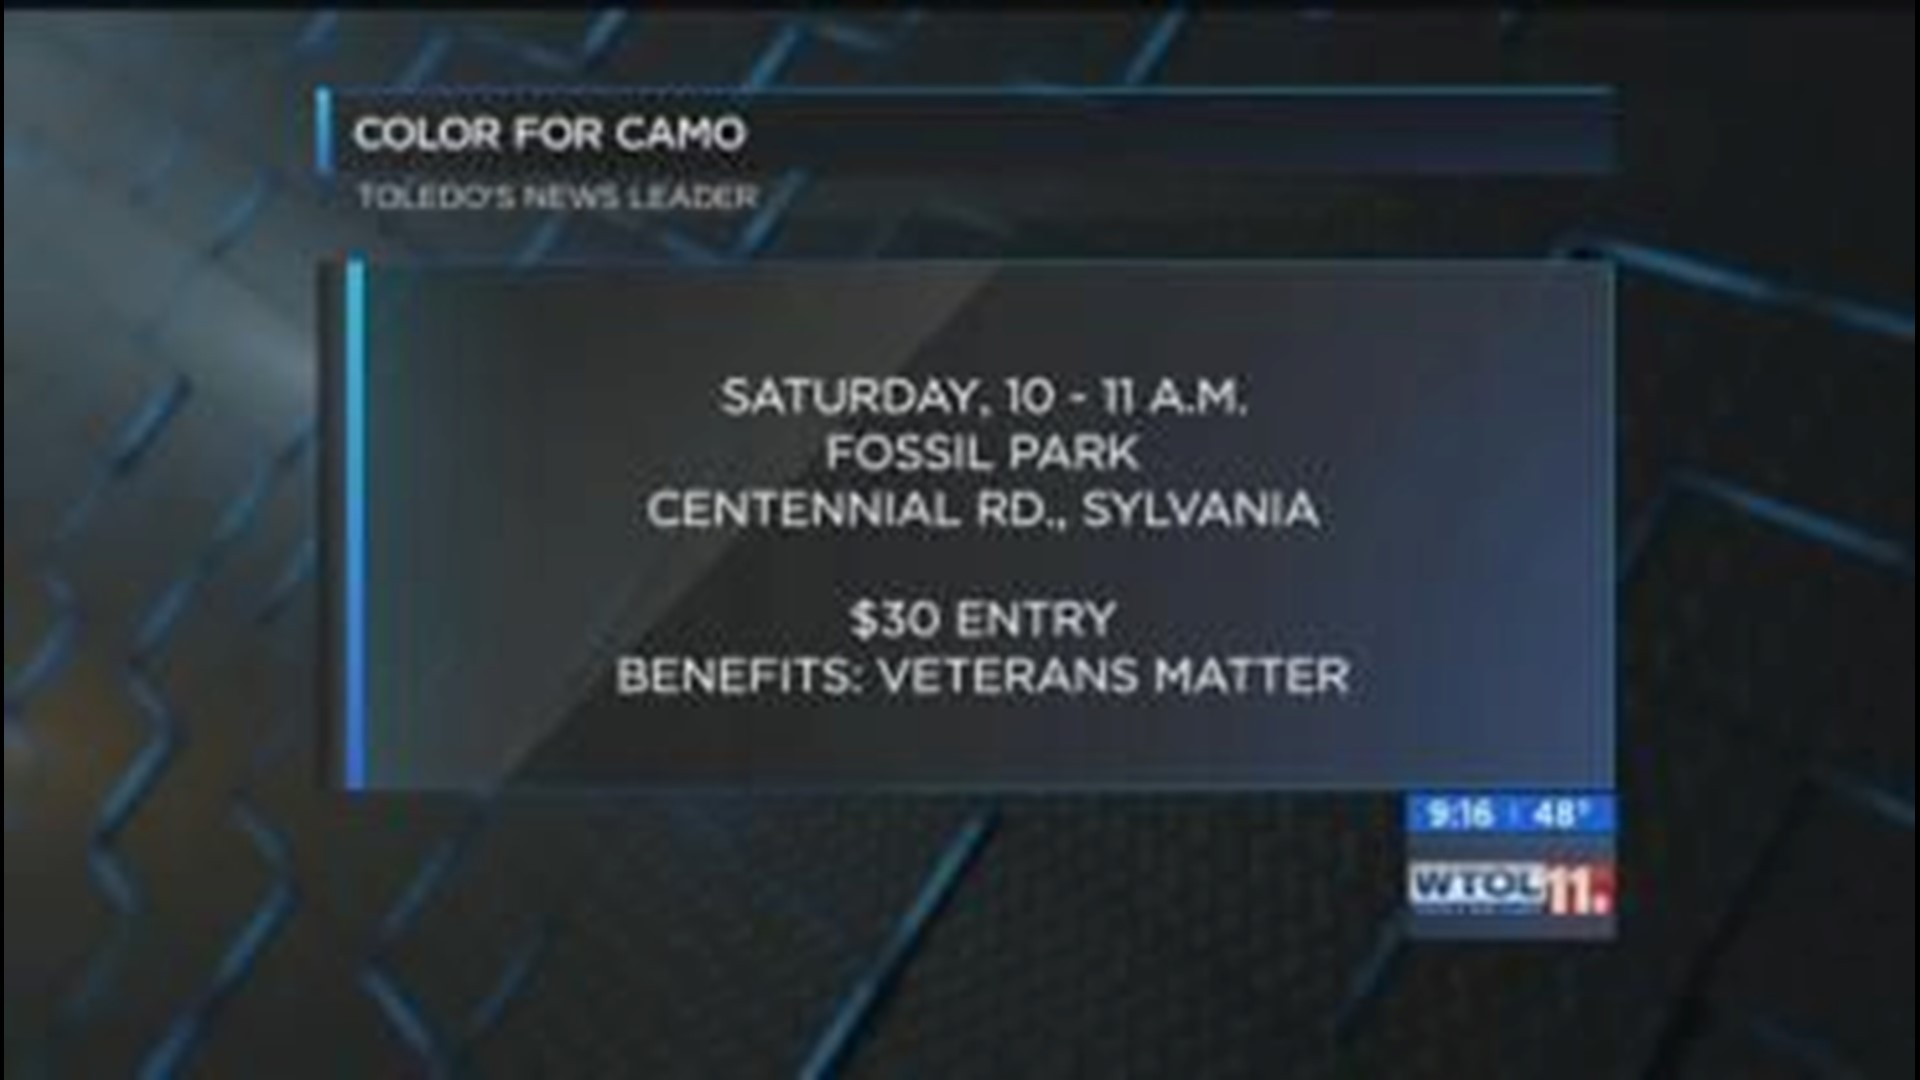 Learn how to help raise money for veterans on WTOL 11 Your Day